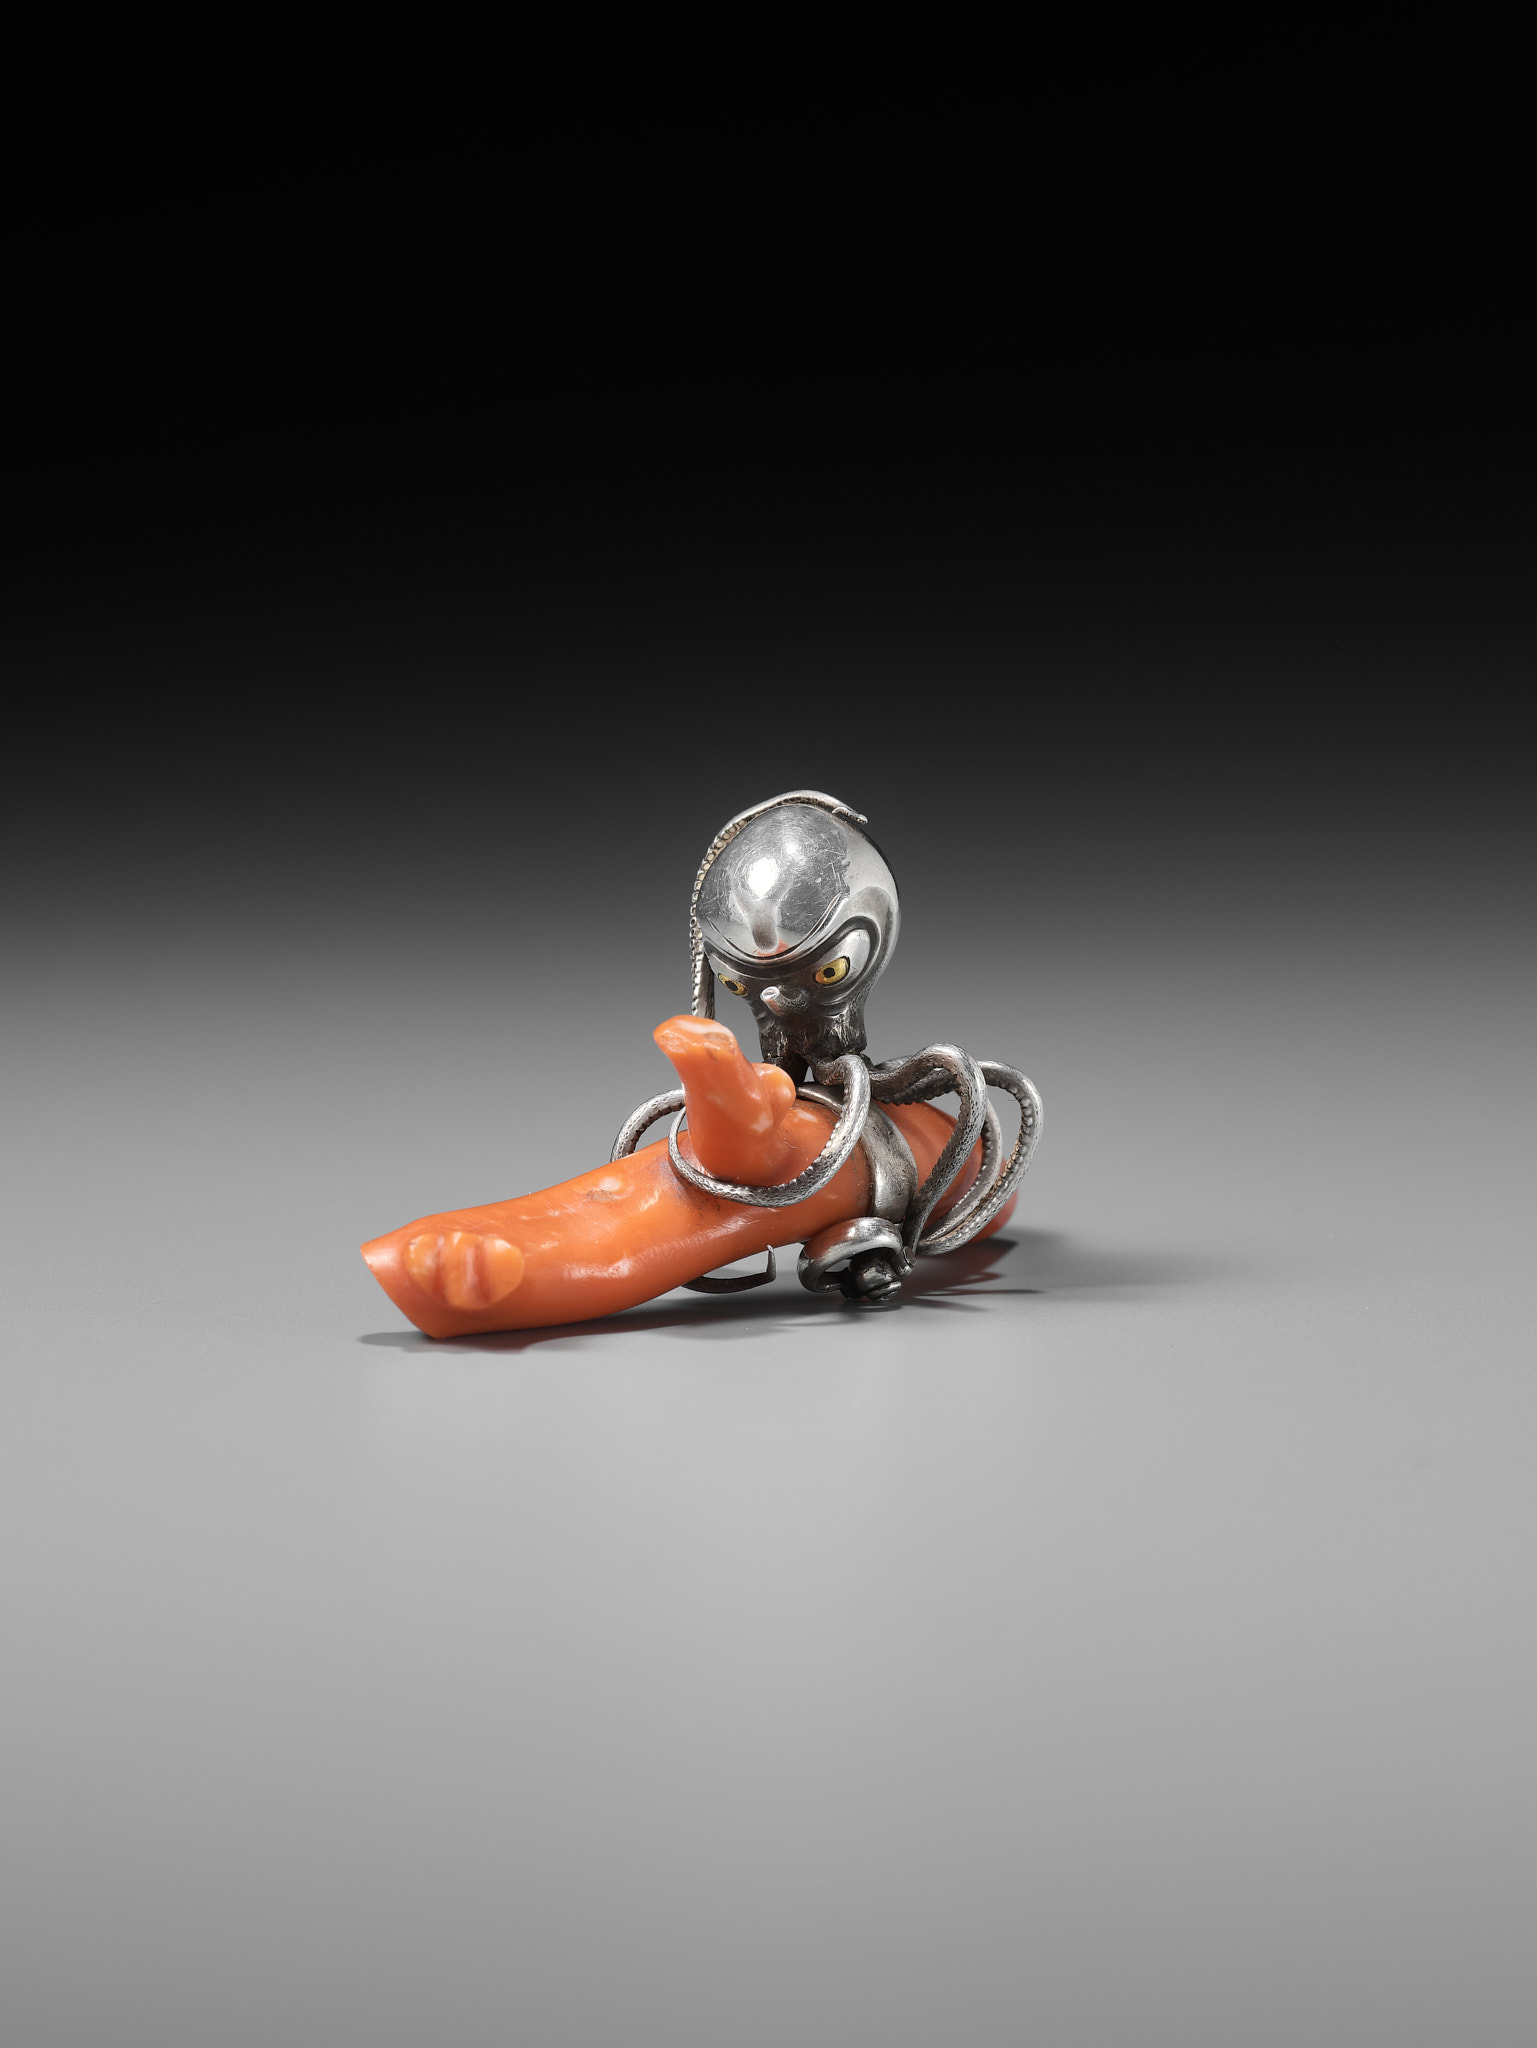 MINKOKU: A LARGE SILVER NETSUKE OF AN OCTOPUS GRASPING A PIECE OF CORAL - Image 2 of 14